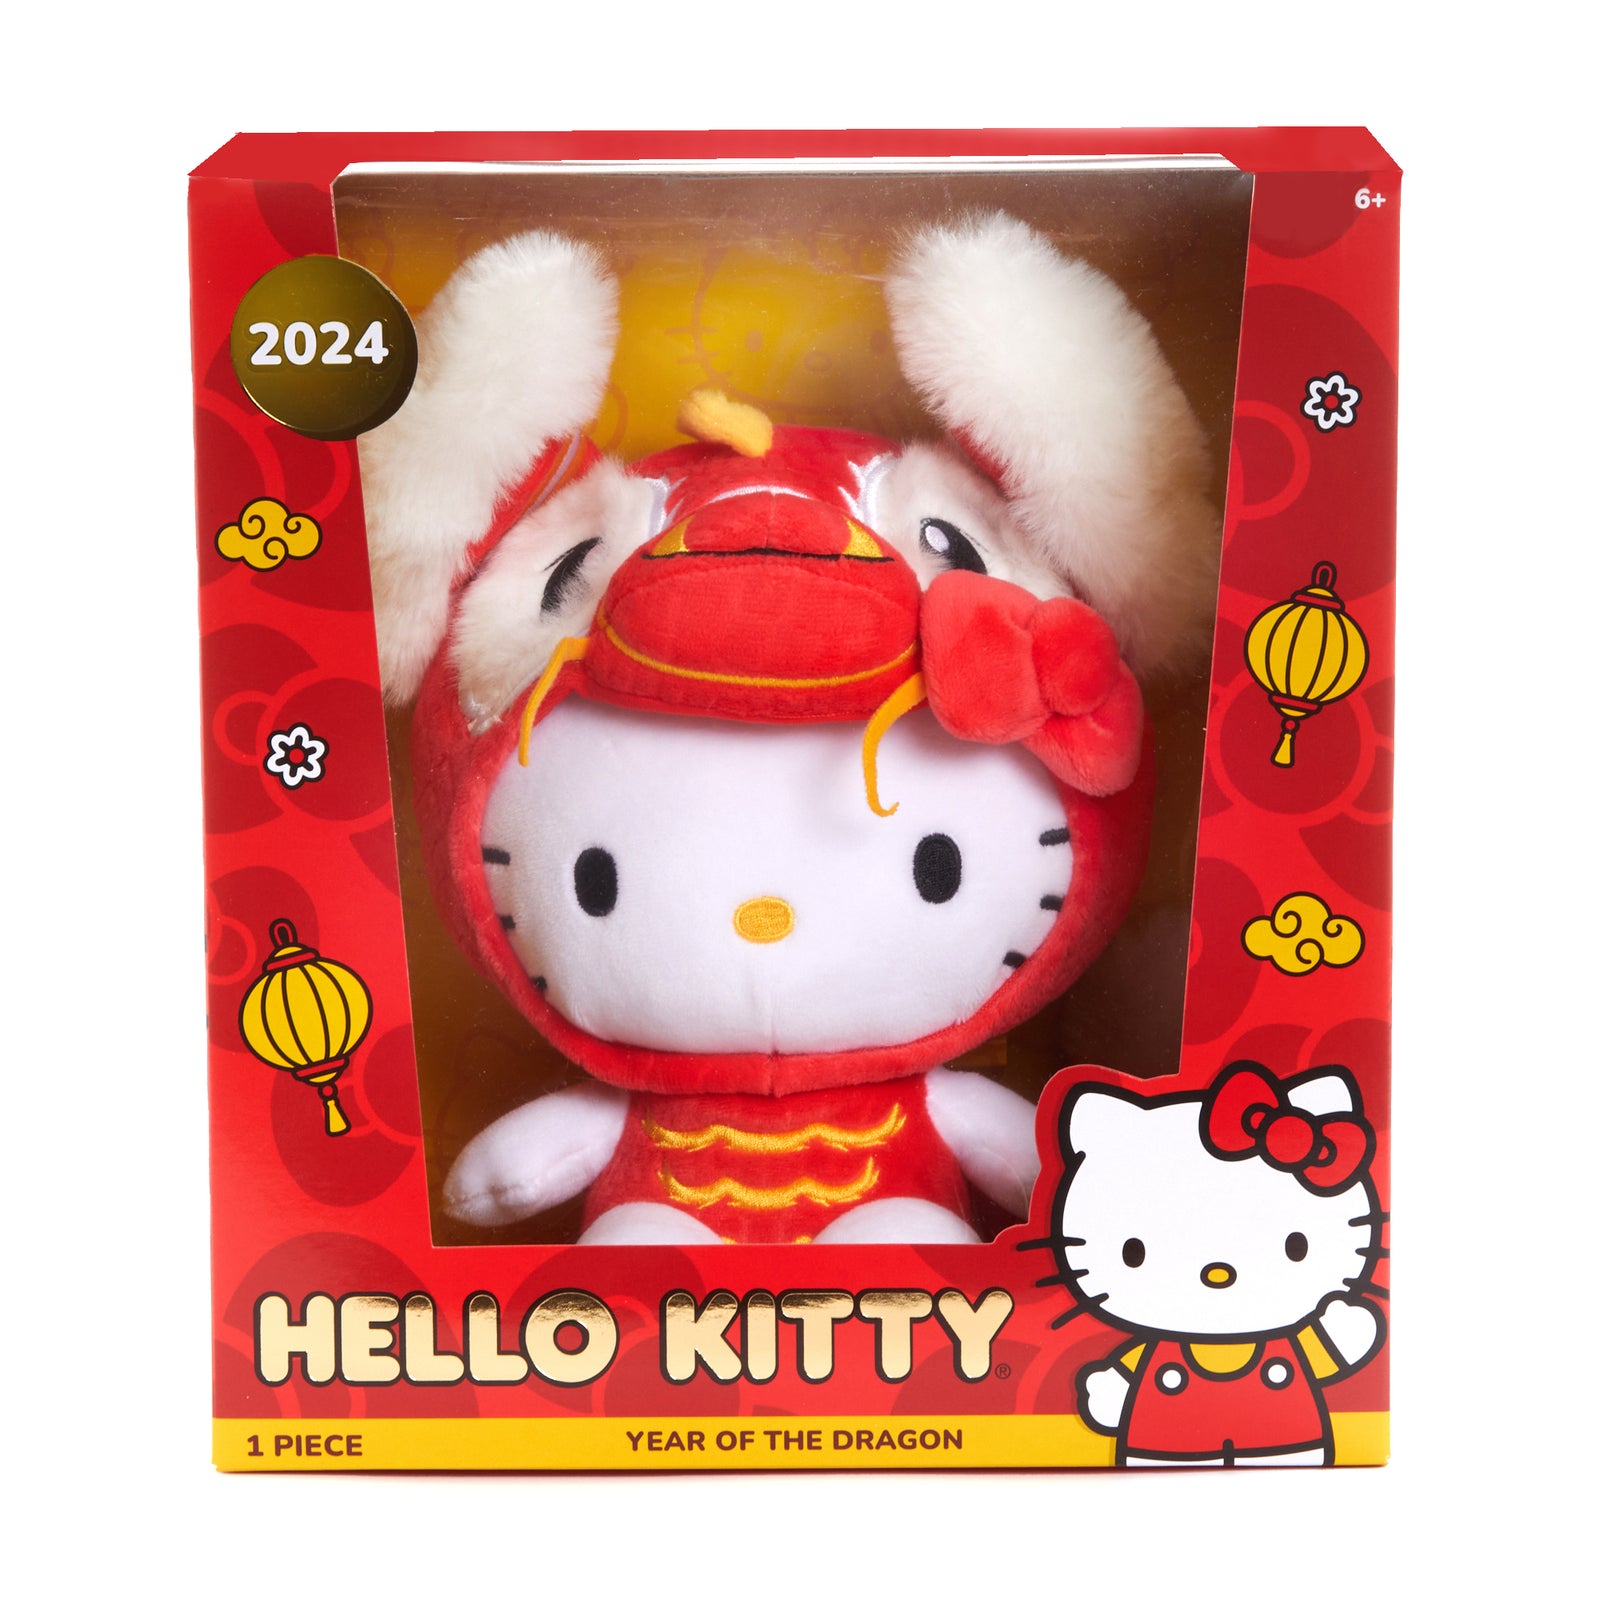 SANRIO BEYOND THE PANDEMIC: AN EVENTFUL 2022 FOR HELLO KITTY AND